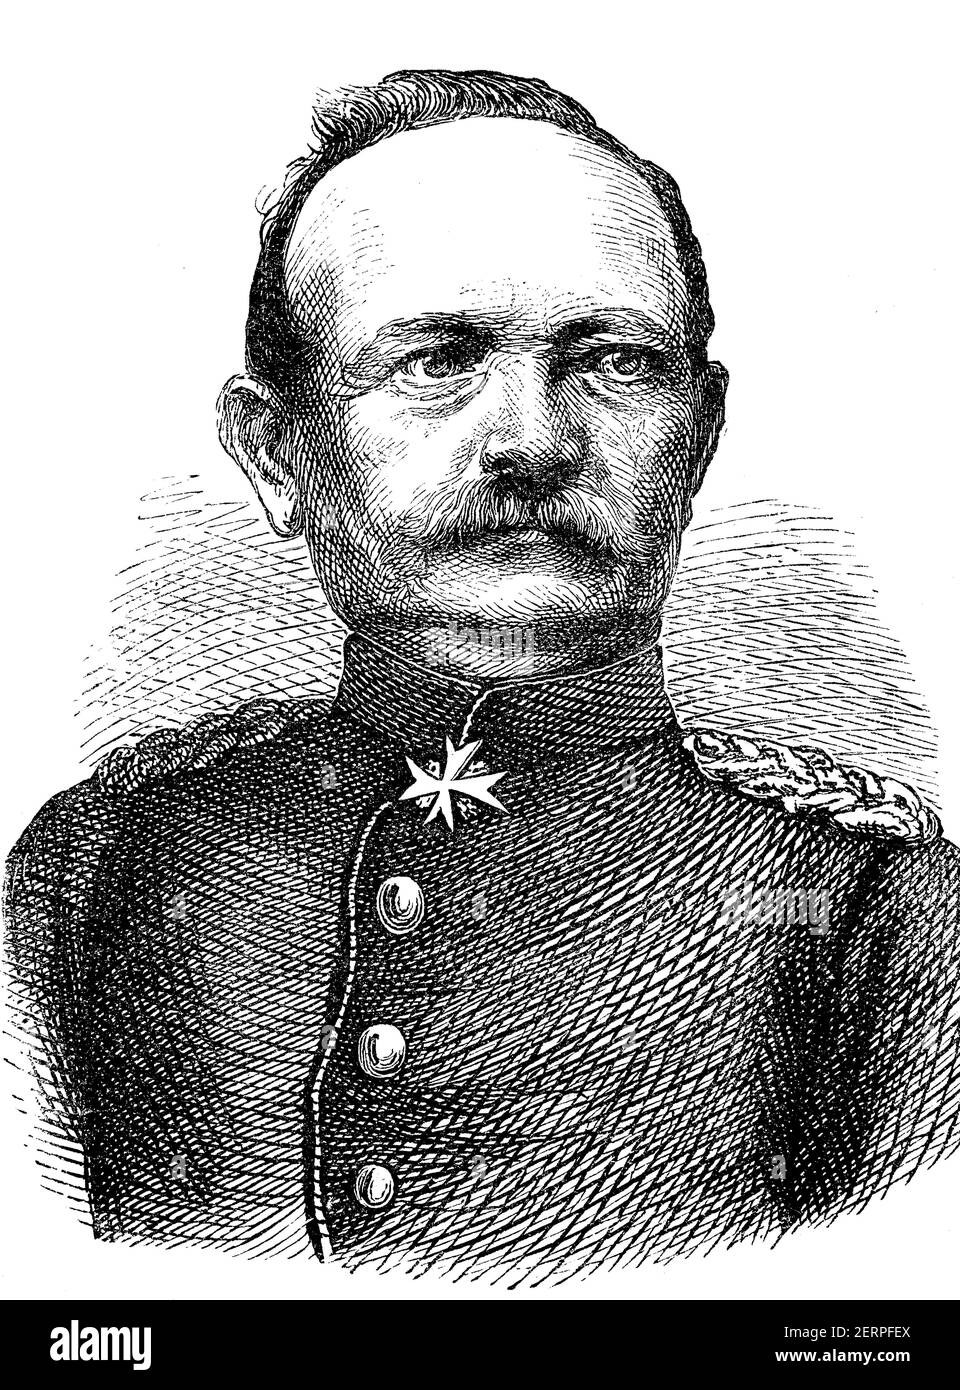 Eduard Friedrich Karl von Fransecky, spelling Franscky, November 16, 1807 - May 21, 189, was a Prussian general of infantry  /  Eduard Friedrich Karl Stock Photo